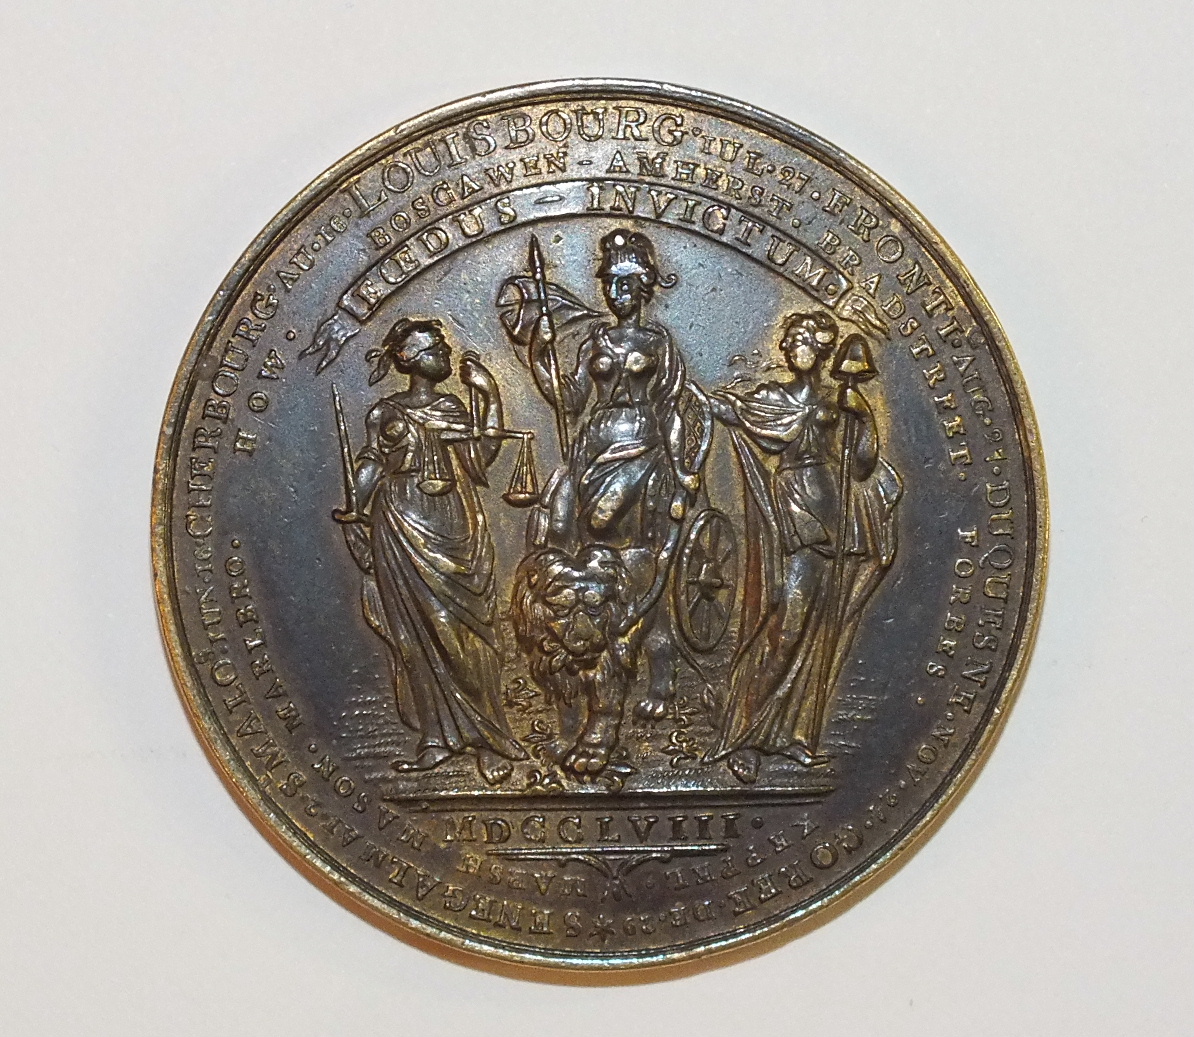 A 1759 Betts-419 "Success" Medal Mule in brass, 4.3cm diameter. This is a muling of the Betts-419 - Image 2 of 2